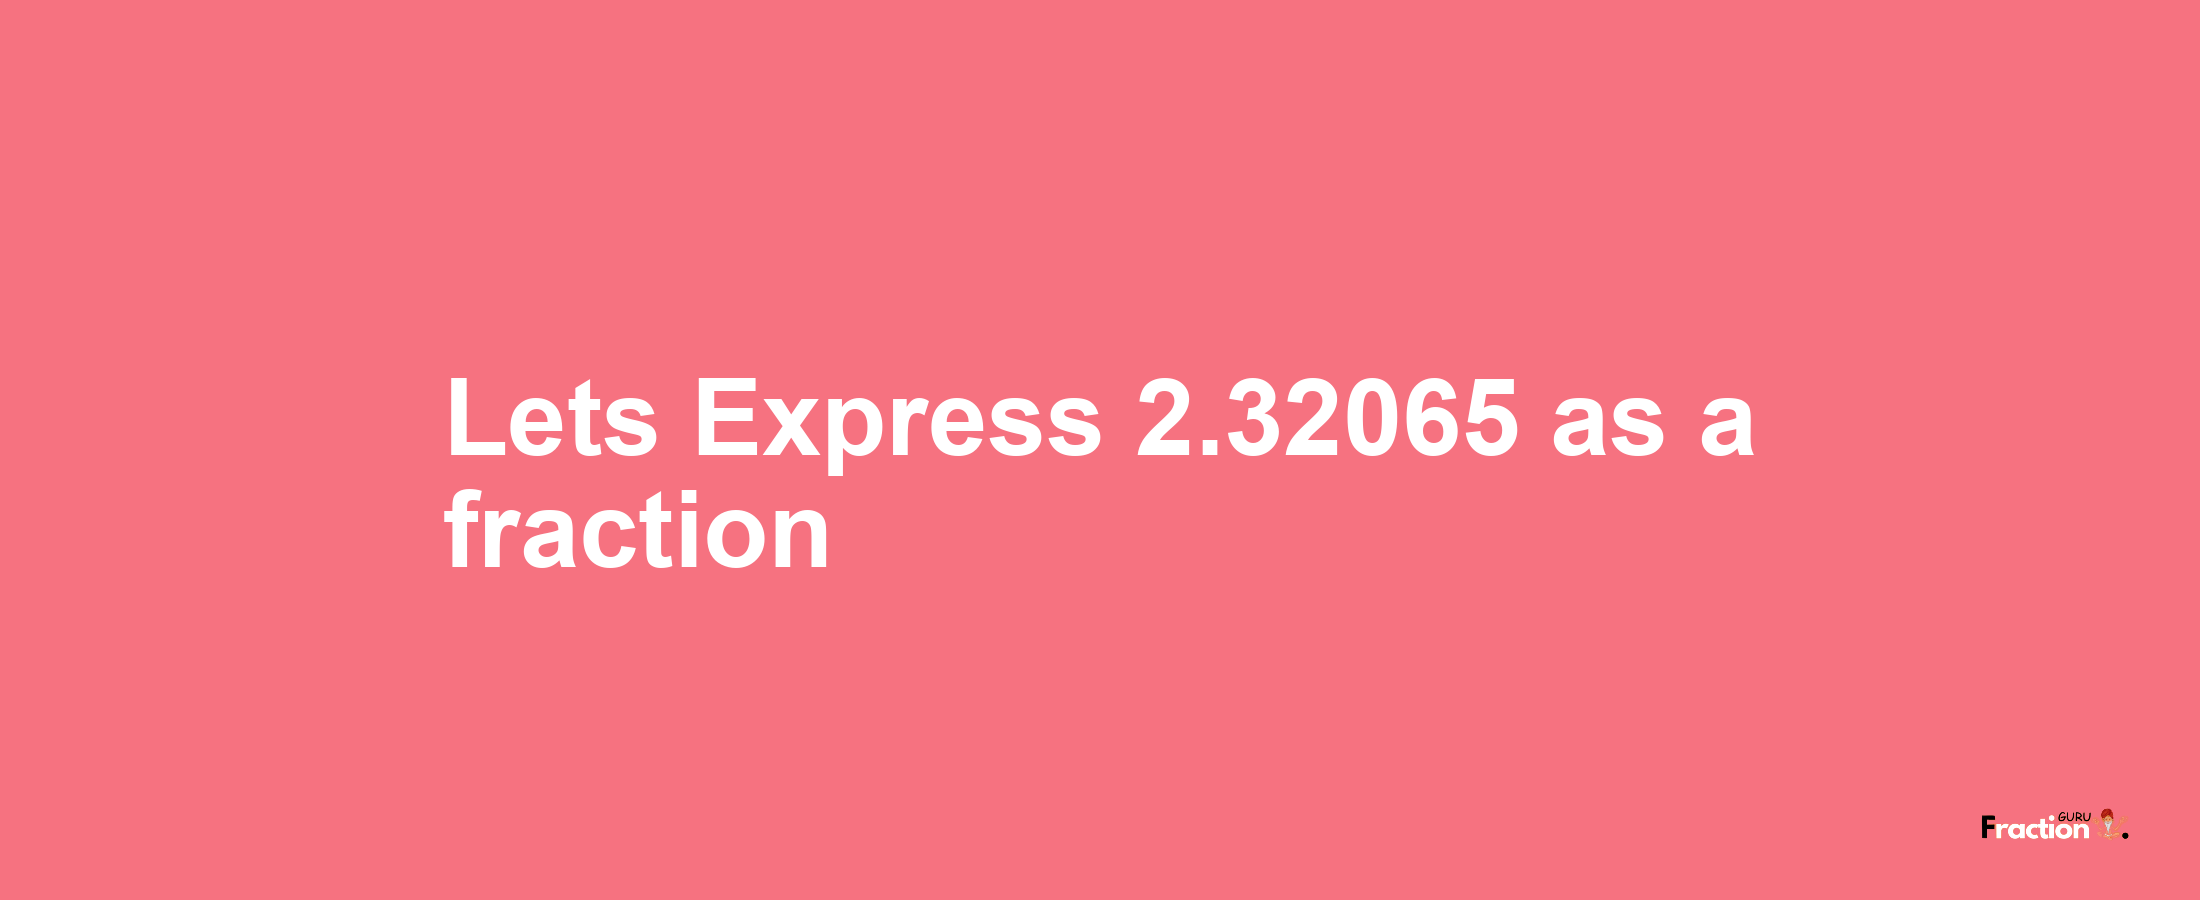 Lets Express 2.32065 as afraction